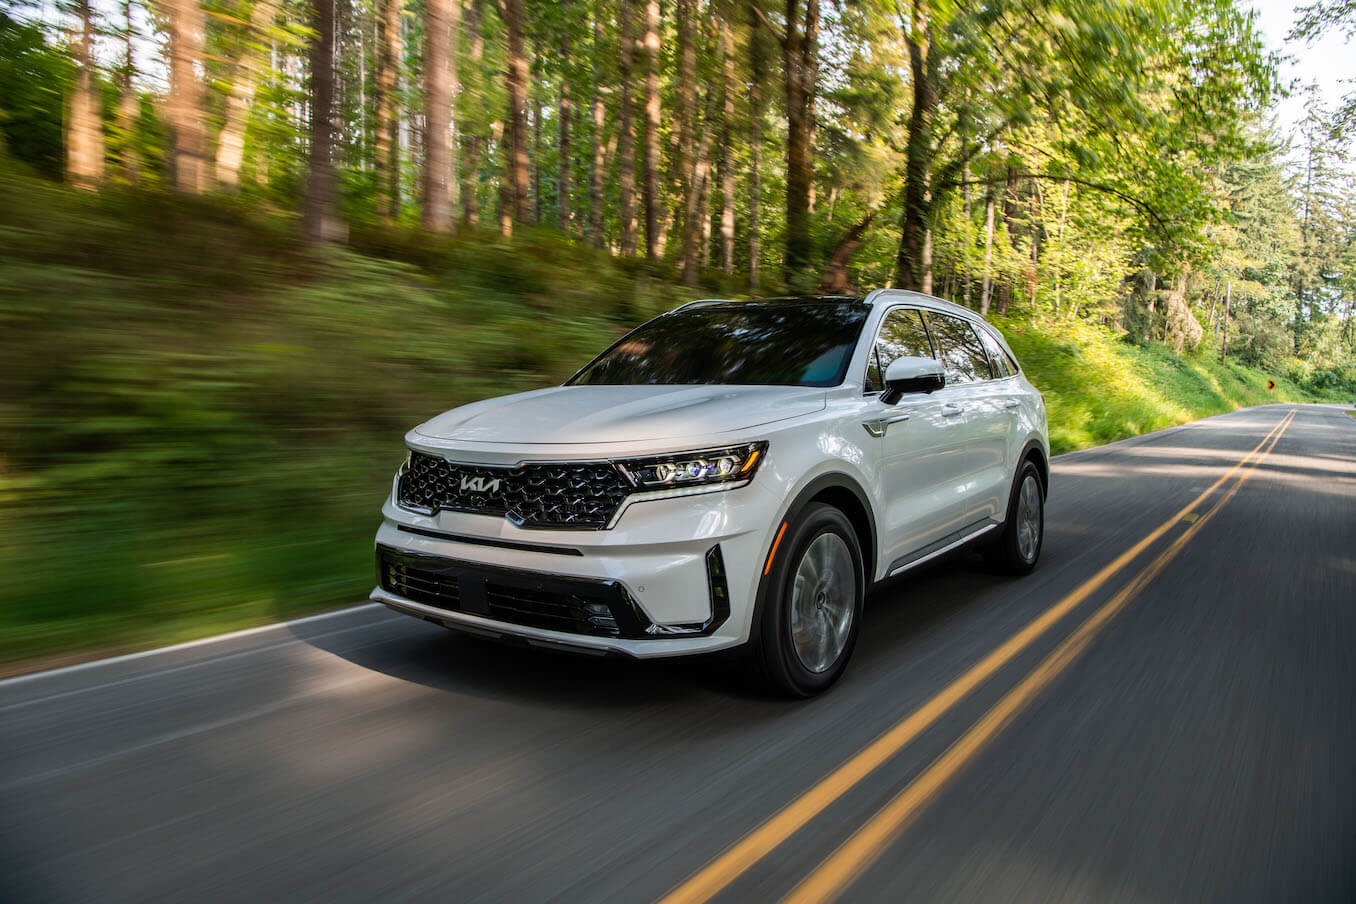 The most expensive Kia model, the 2023 Kia Sorento PHEV in white, driving along a forest road.